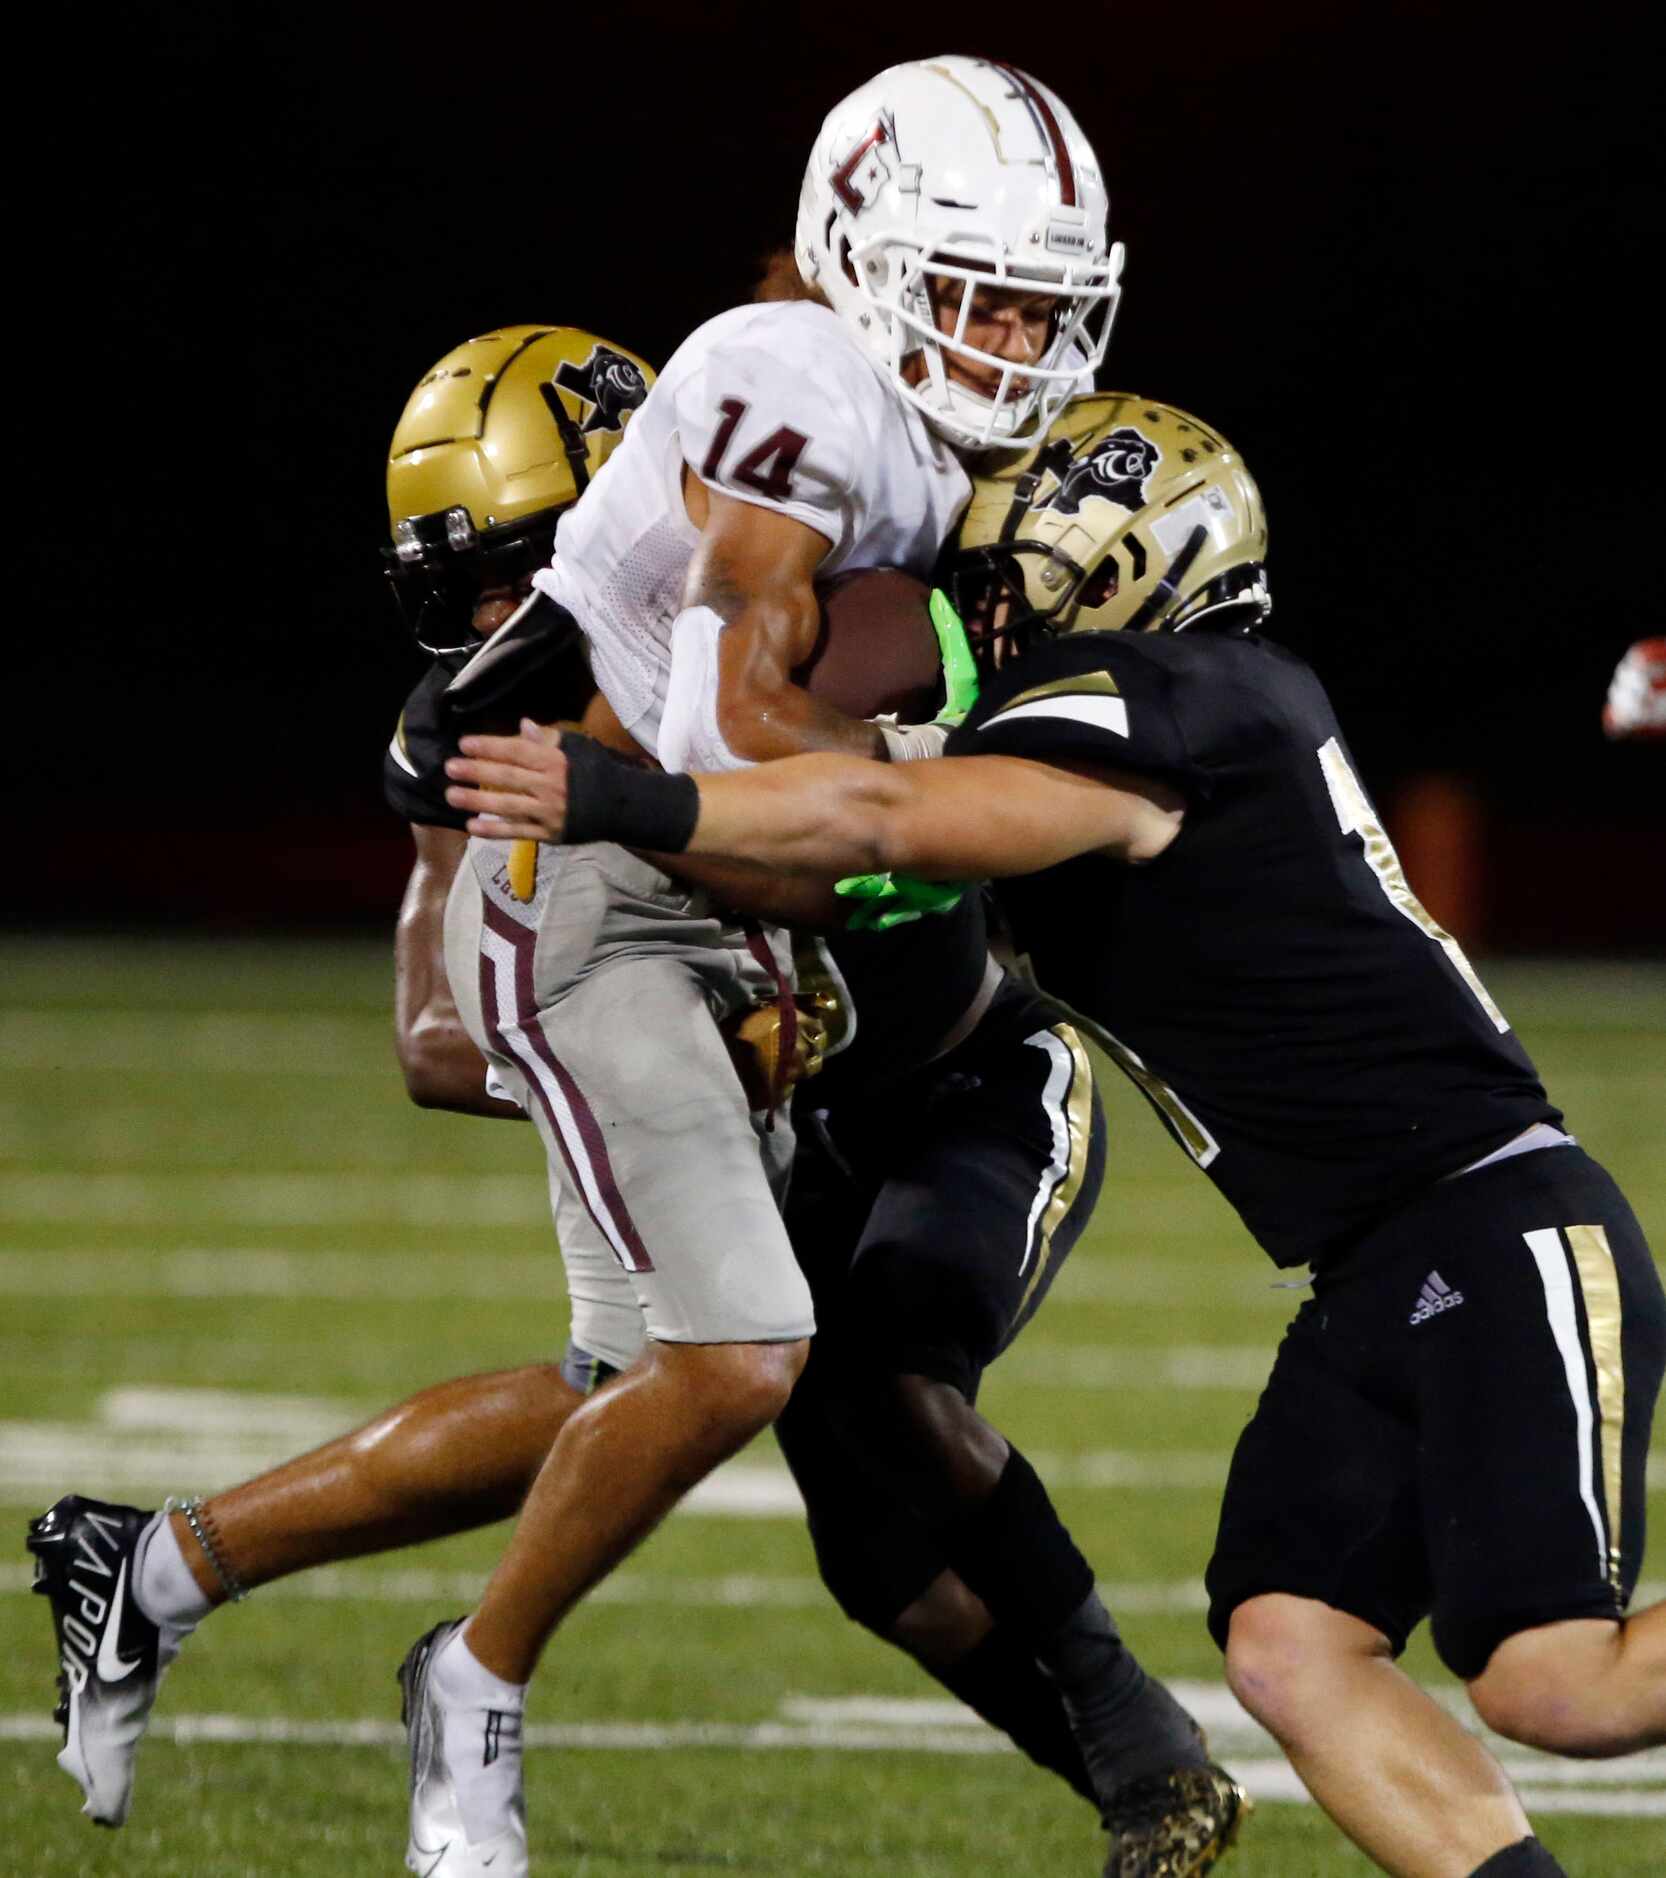 Lewisville WR Kye Stone (14) is hit by several Plano East defenders after making a catch...